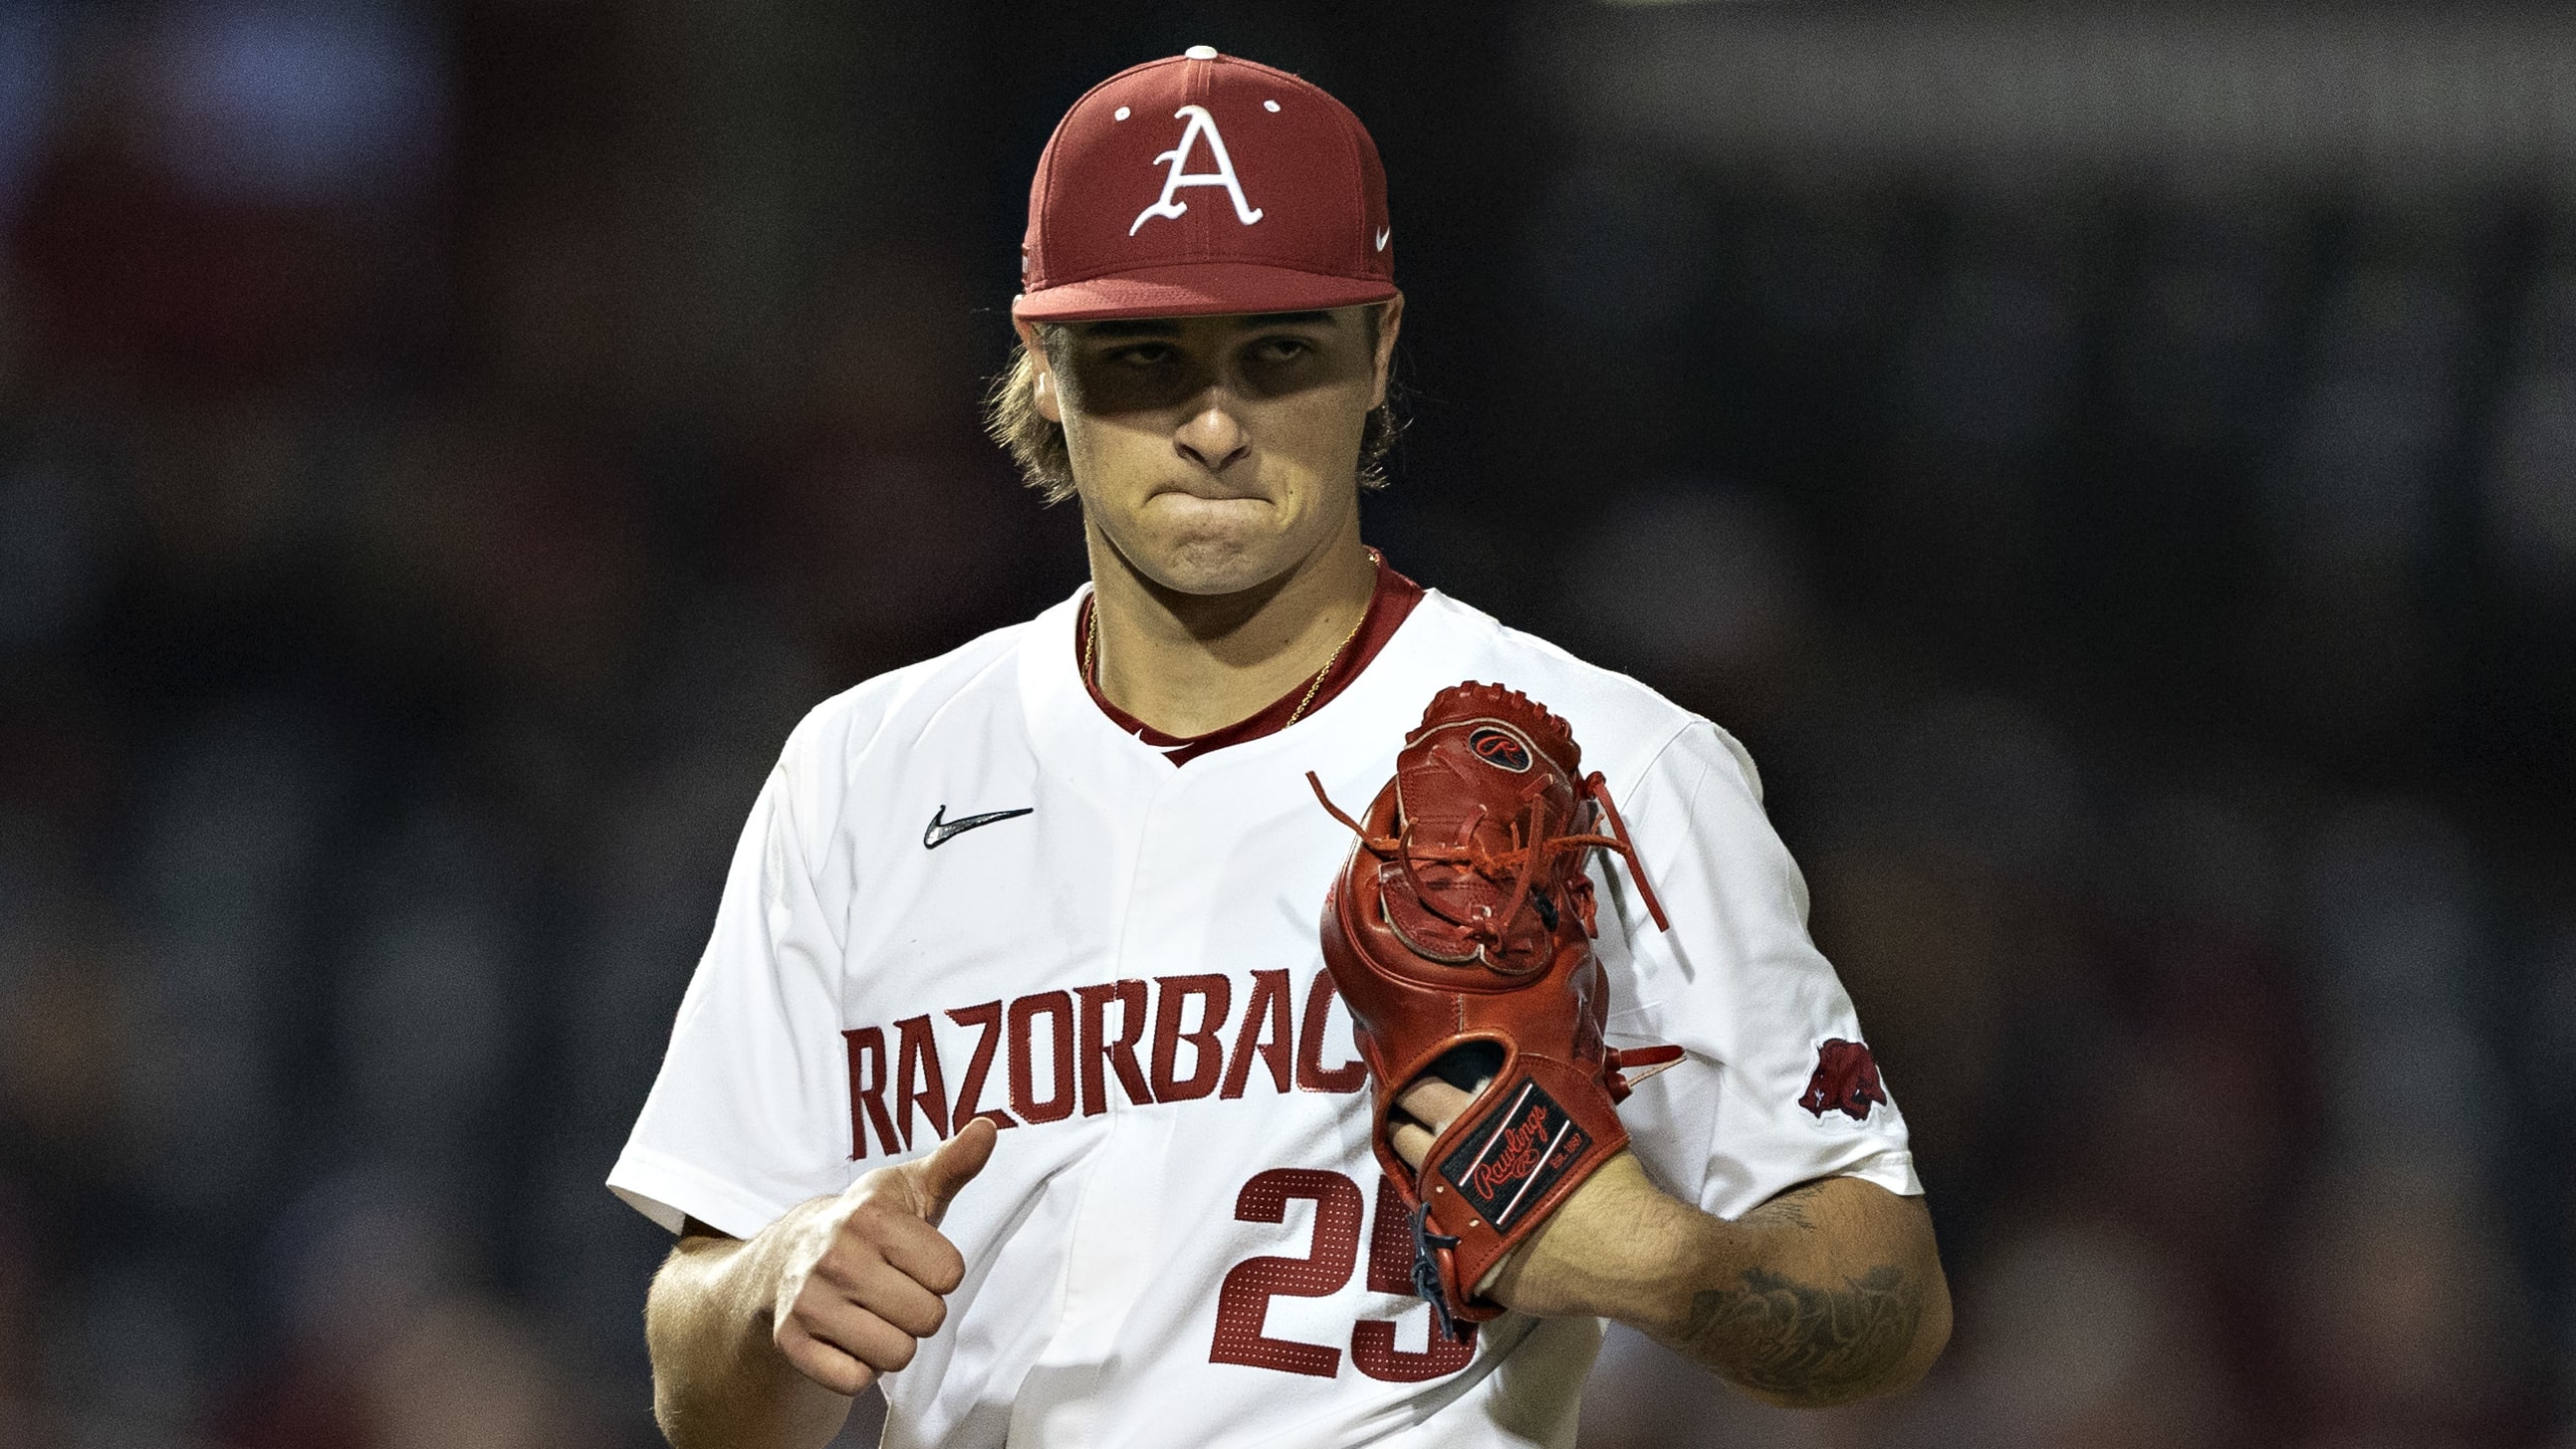 Arkansas Razorbacks pitcher Brady Tygart didn't have his best stuff early against the Auburn Tigers on Friday night in Auburn, Ala., but it turned out to be enough in a 6-5 win by the Hogs to clinch the SEC series.